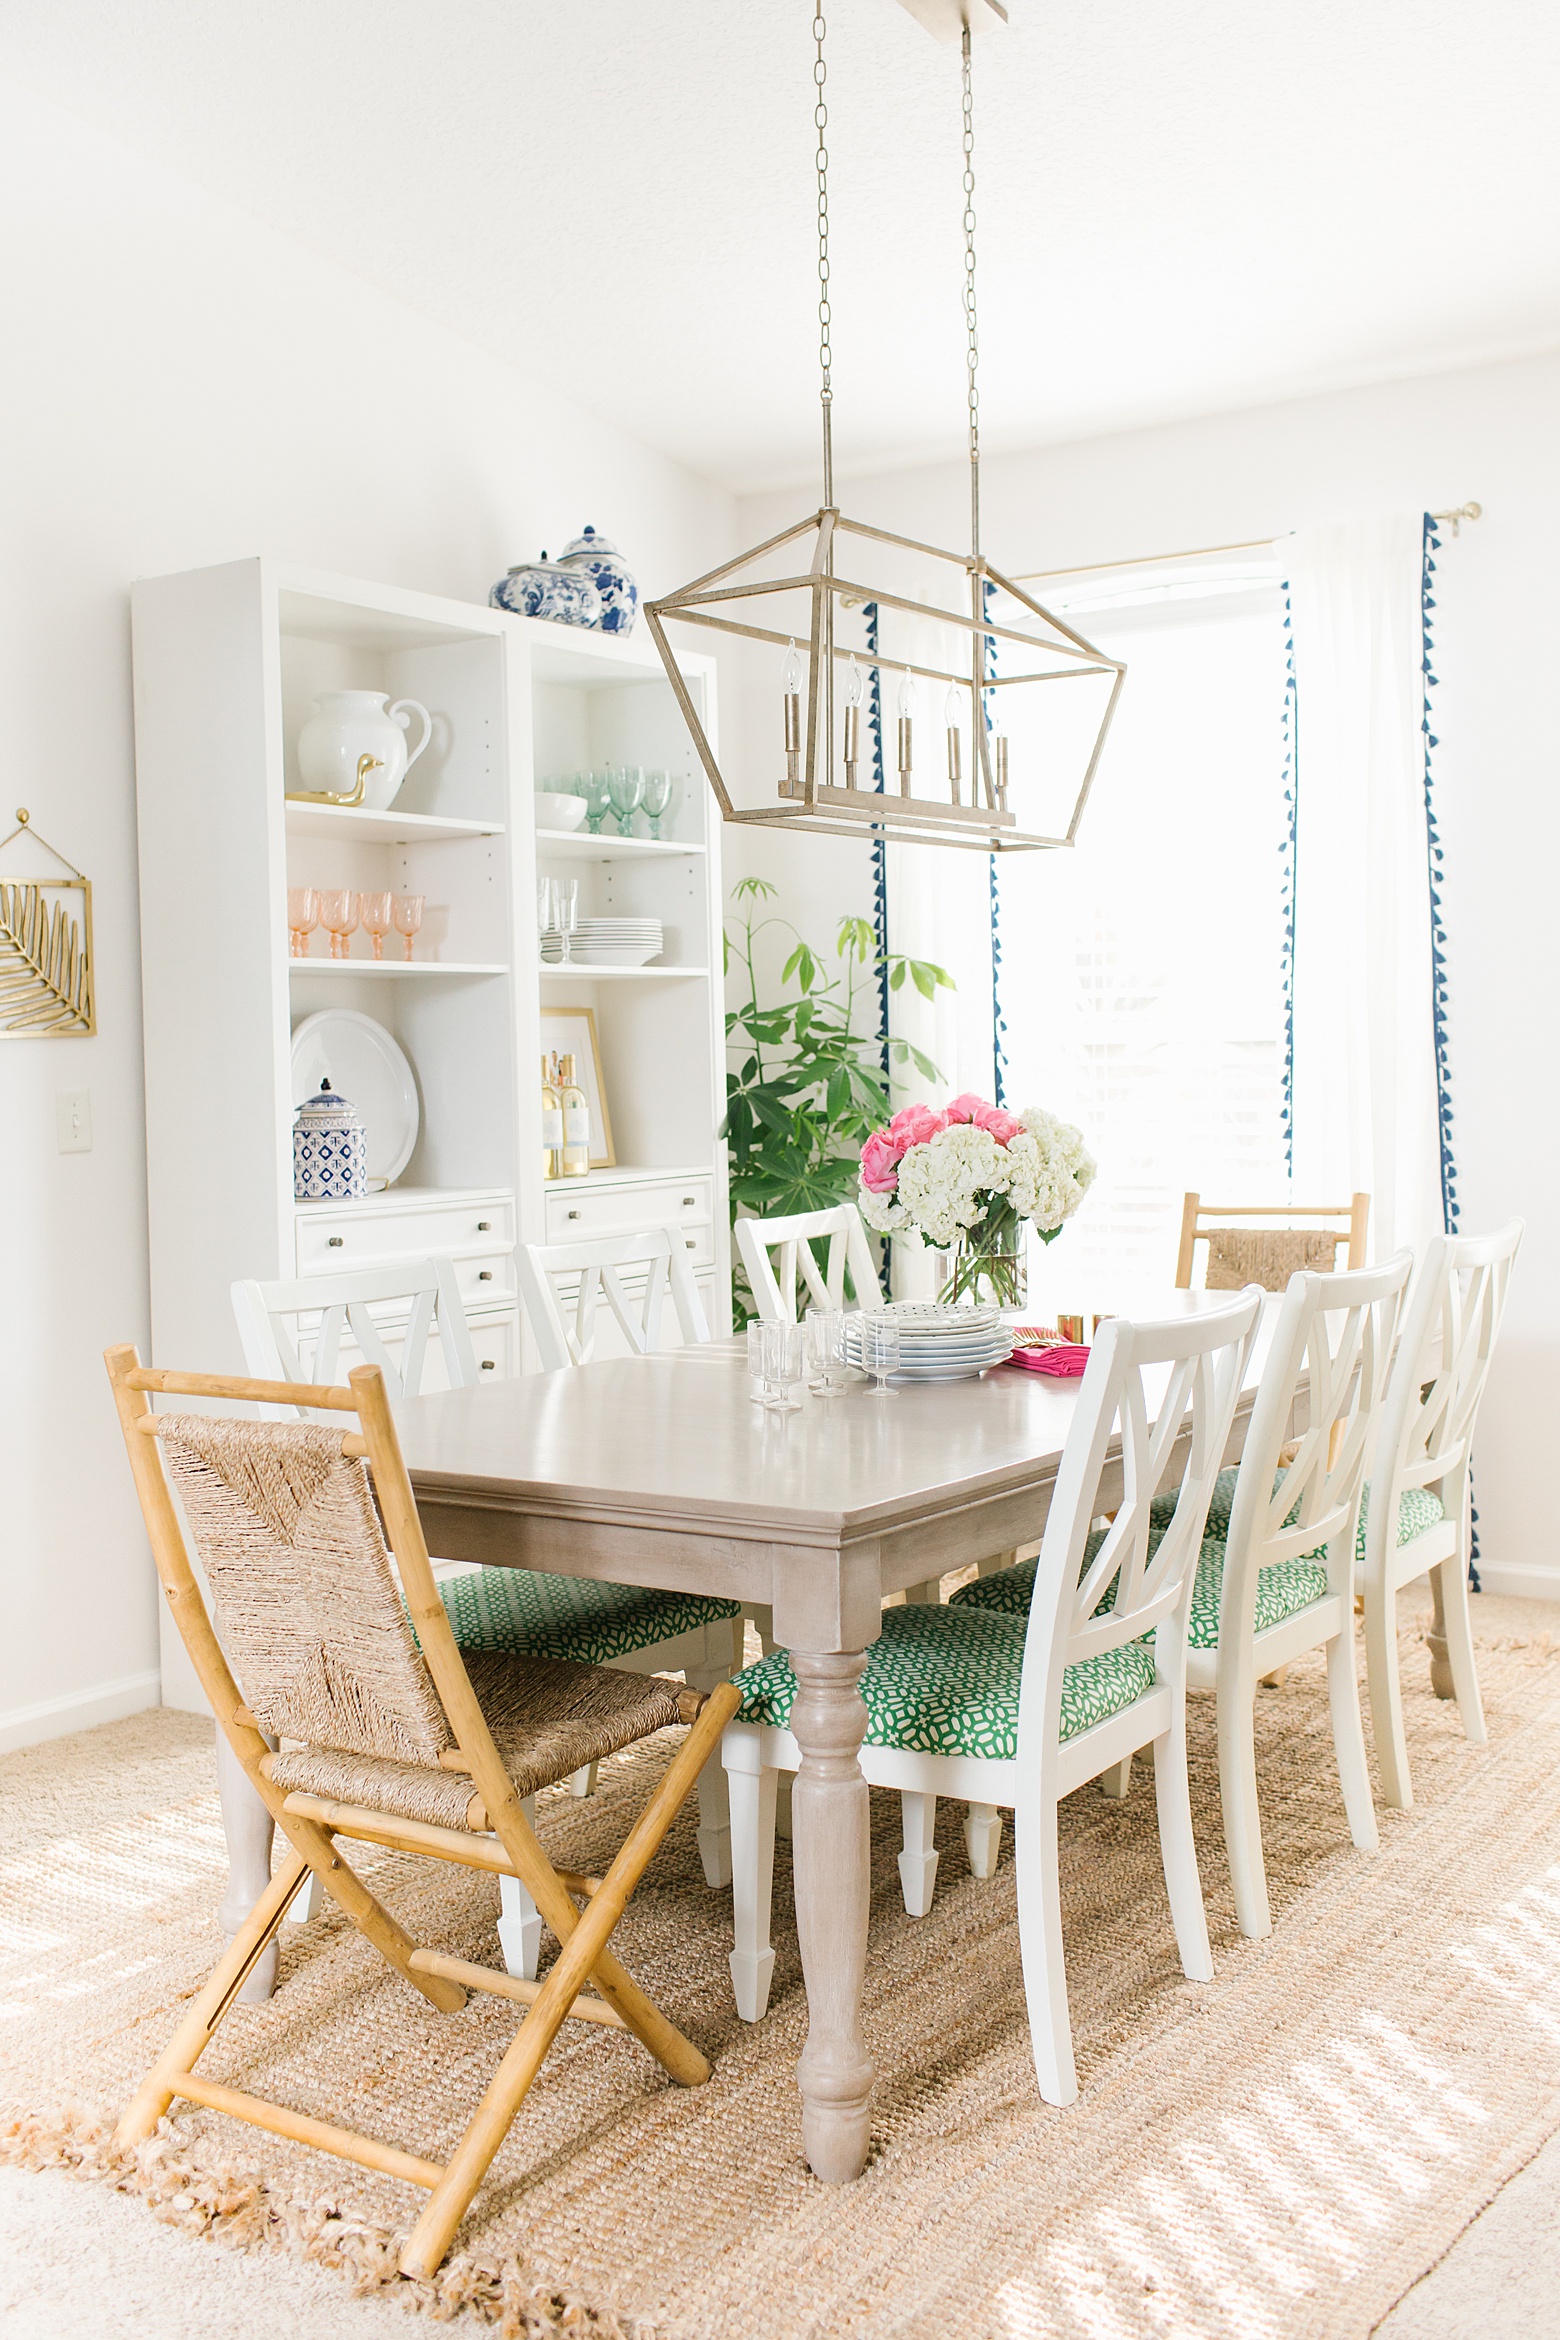 Bright Florida Colorful Dining Room, brass lantern light fixture, restoration hardware shelves, jute rug, family friendly dining room, white walls, bamboo dining chairs, design by Megan Martin Creative